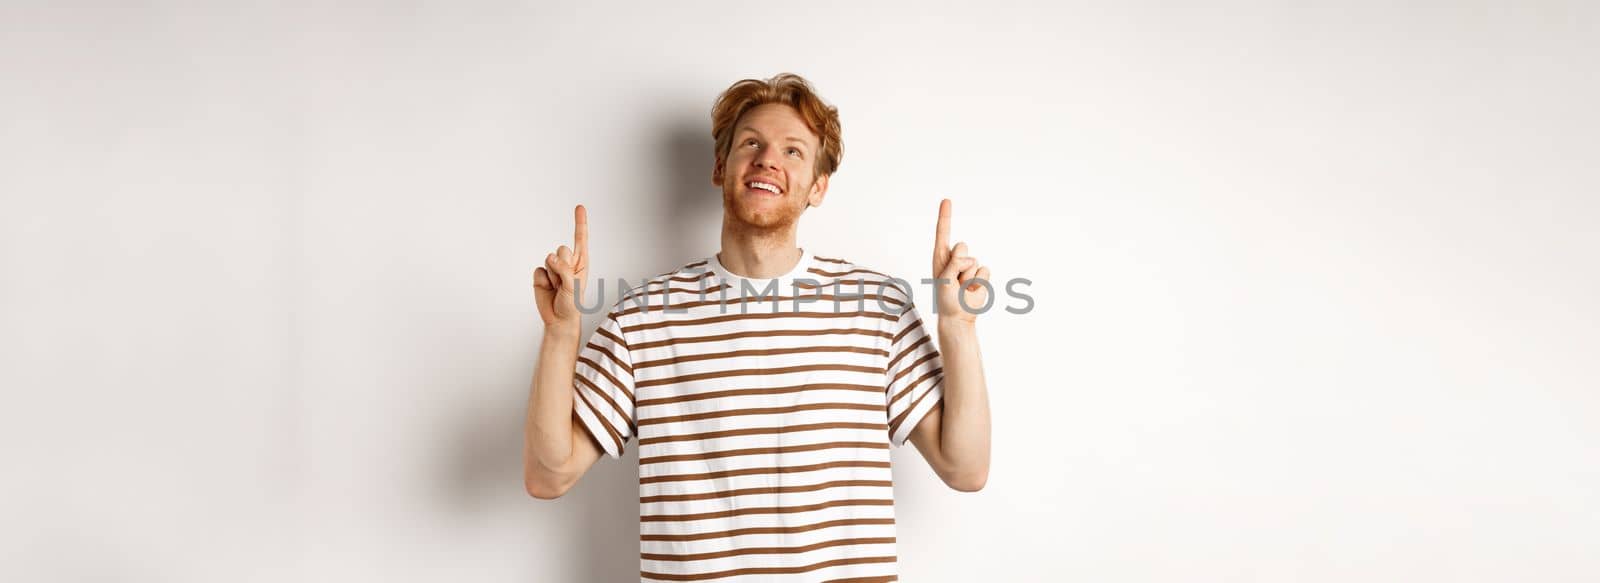 Happy young man with red hair and beard pointing, looking up with dreamy smile, checking out special promo offer, white background.